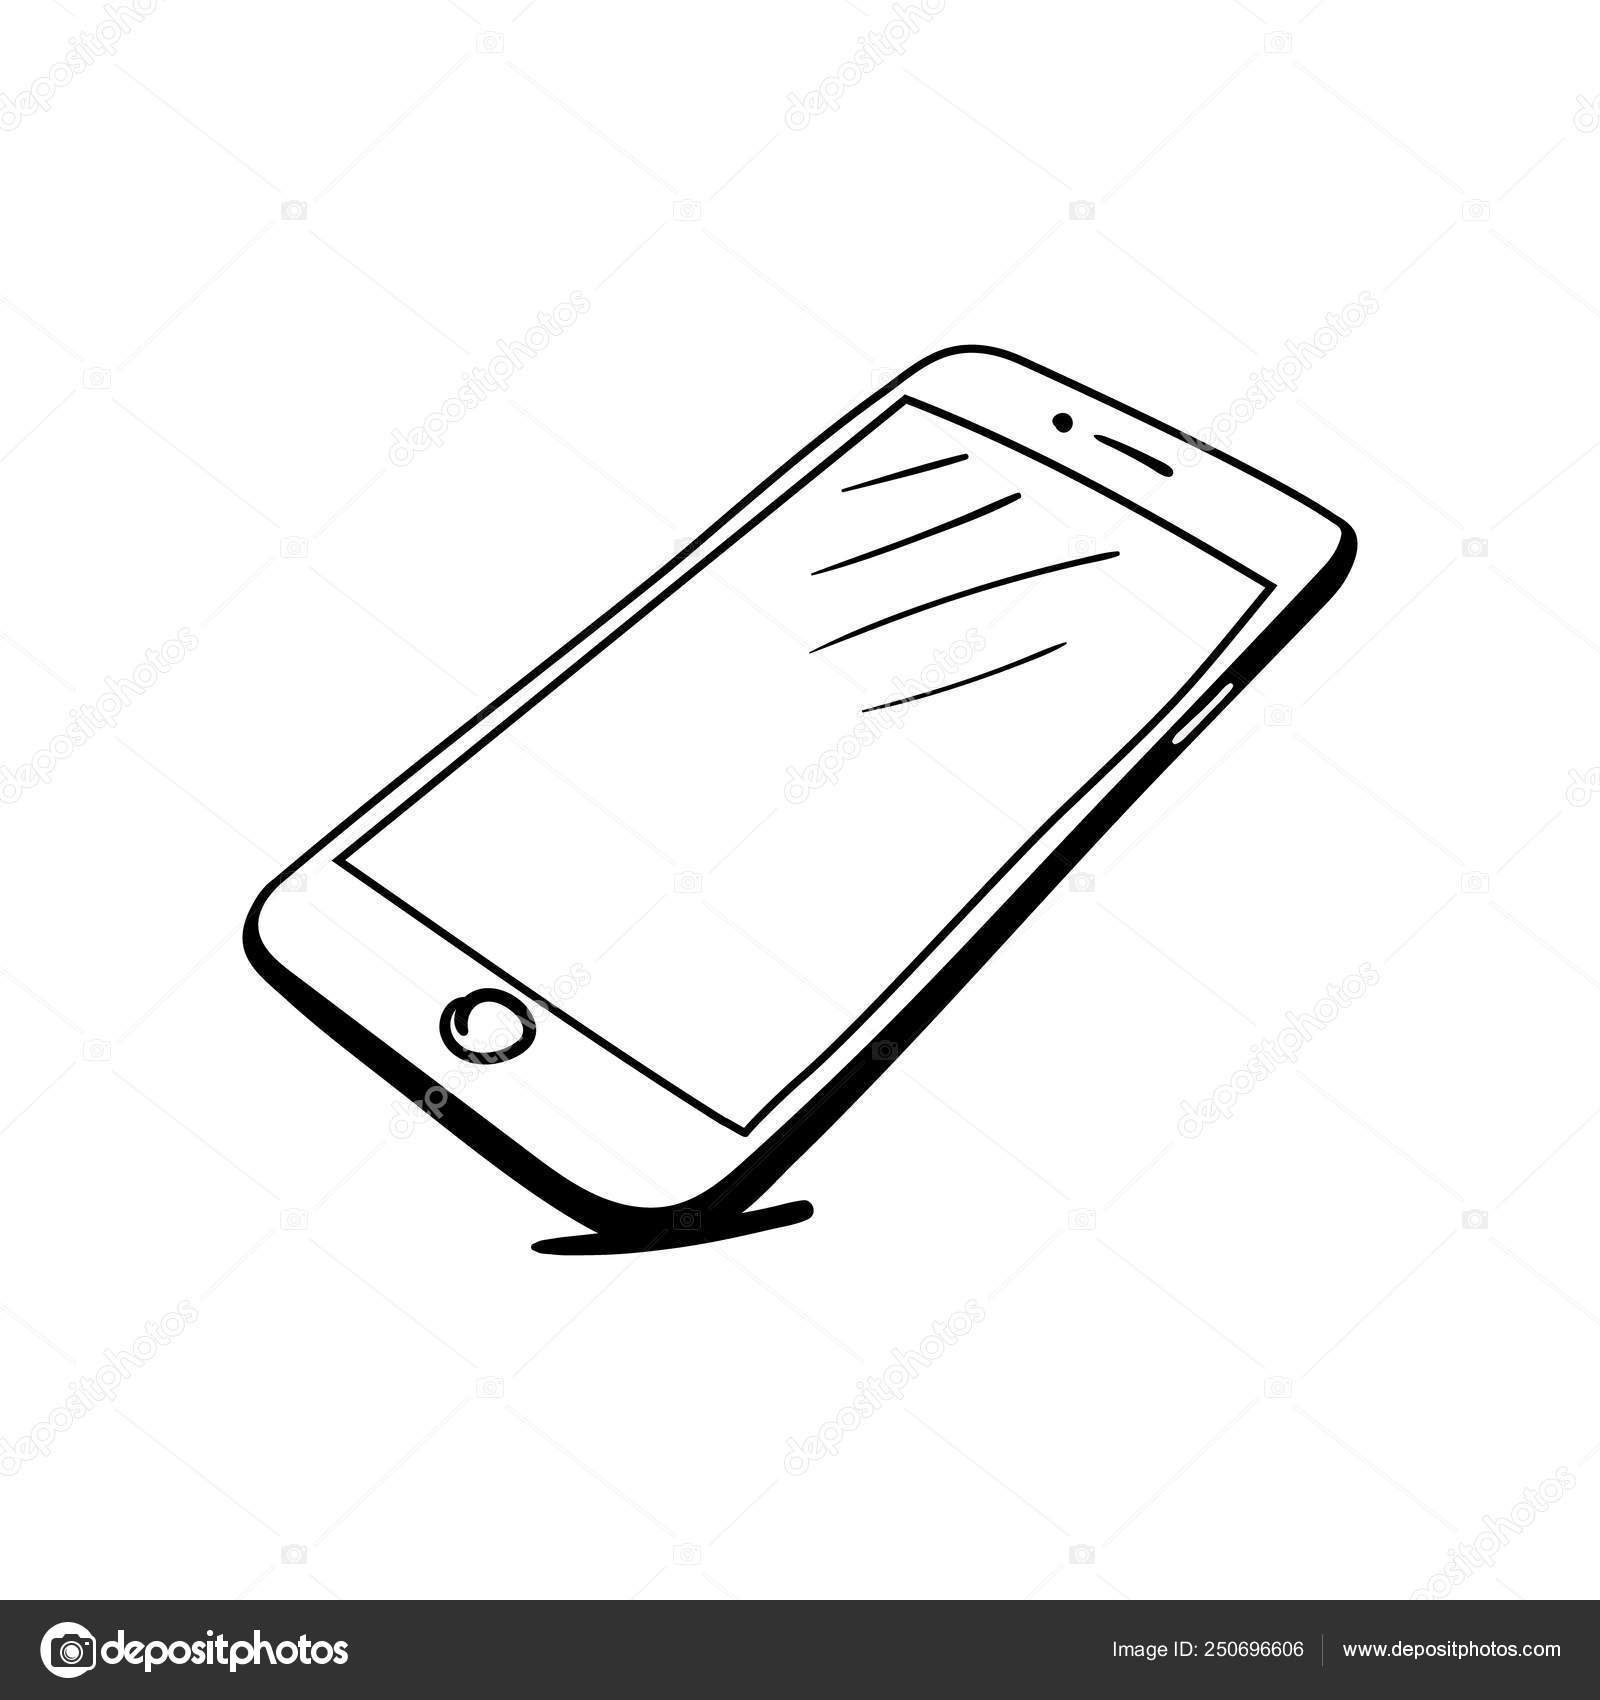 Sketch Smartphone Phone Isolated On White Stock Vector Royalty Free  1309183276  Shutterstock